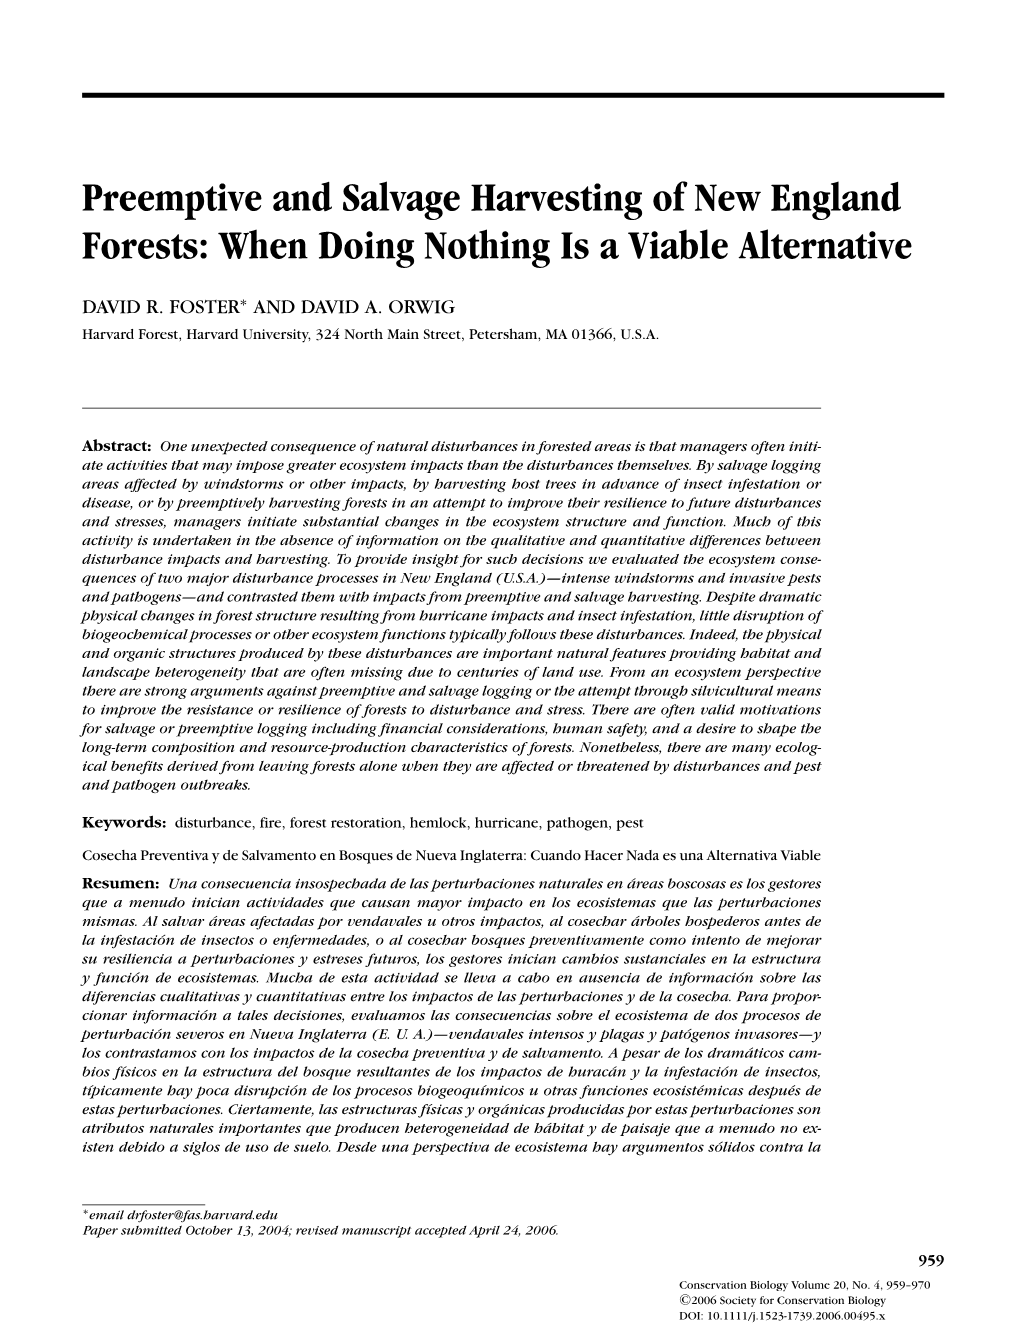 Preemptive and Salvage Harvesting of New England Forests: When Doing Nothing Is a Viable Alternative